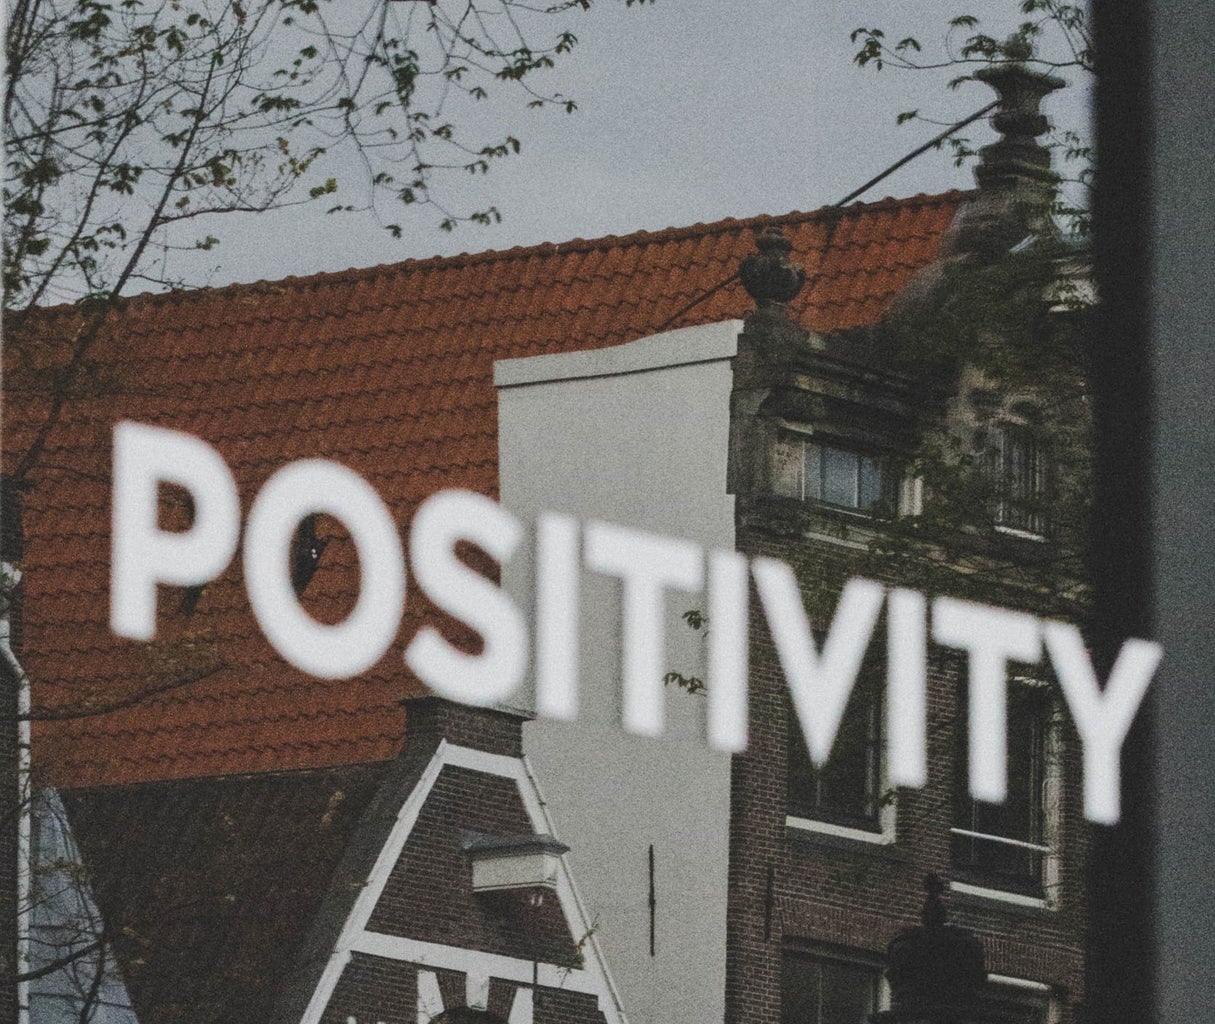 The word \"positivity\" written in white and in all caps in front of the top of a building.